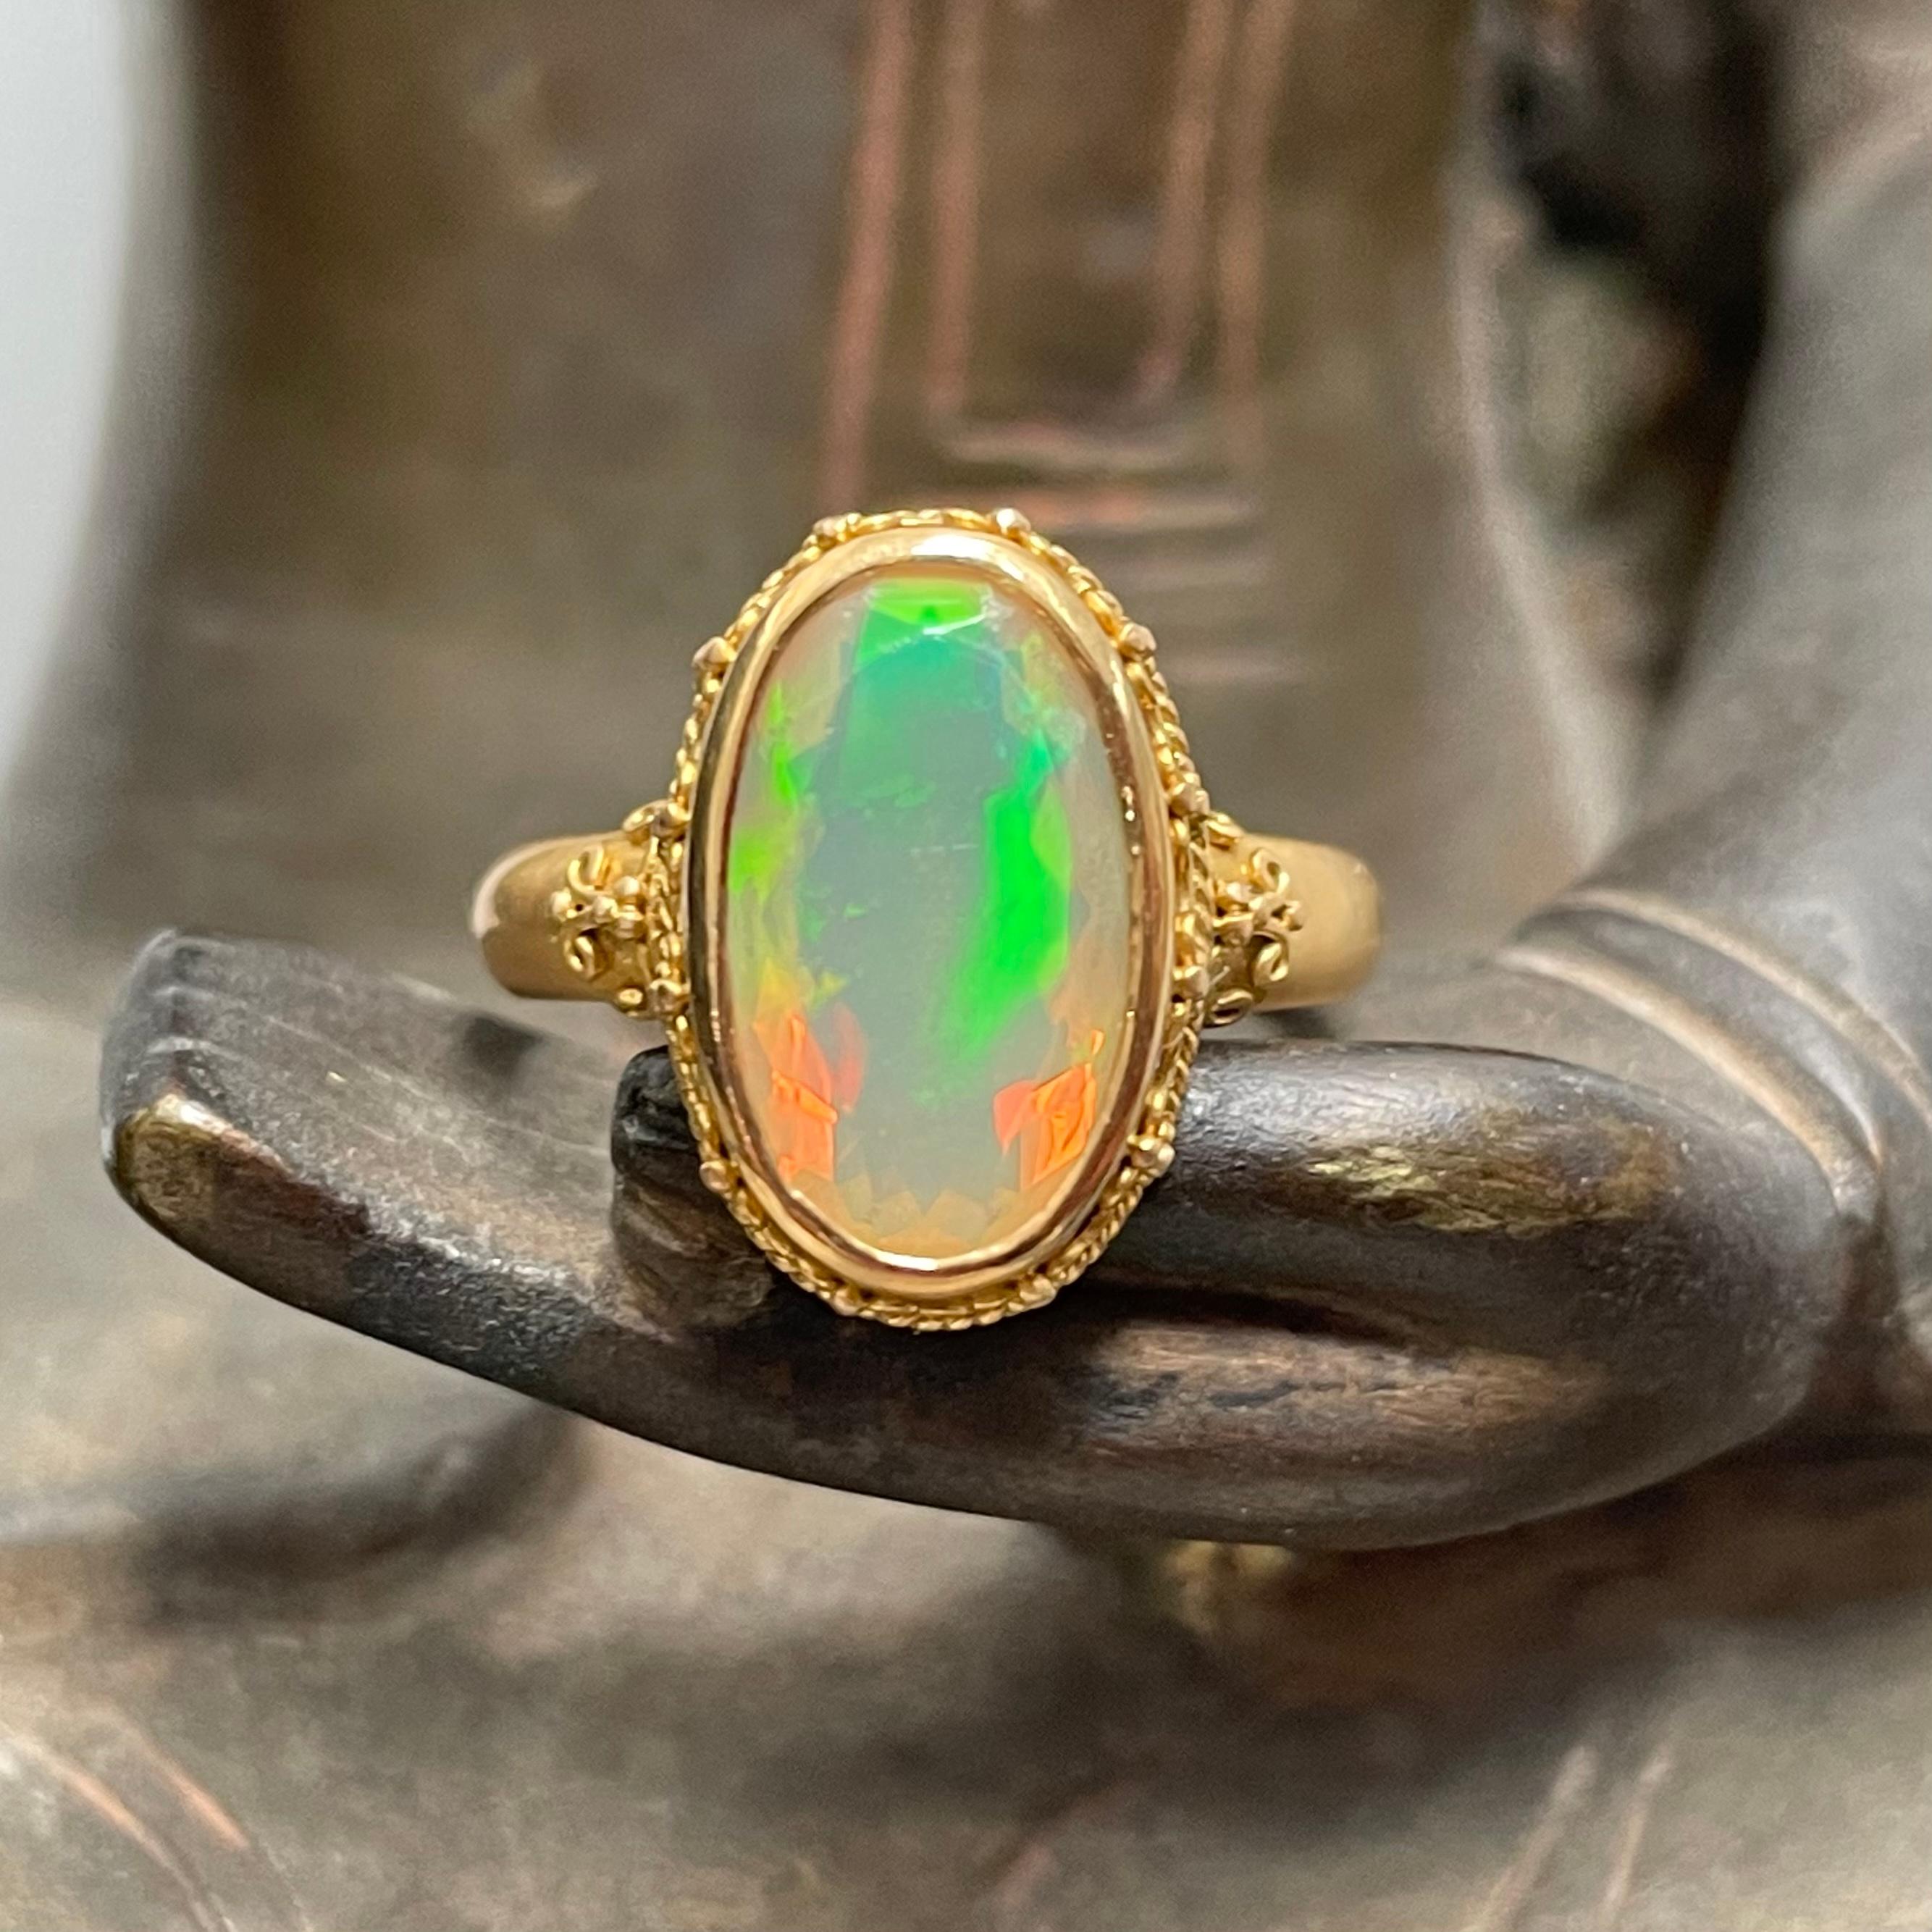 A long 8 x 13 mm oval faceted Ethiopian opal with flashes of orange and green is held by a hand applied wire and 